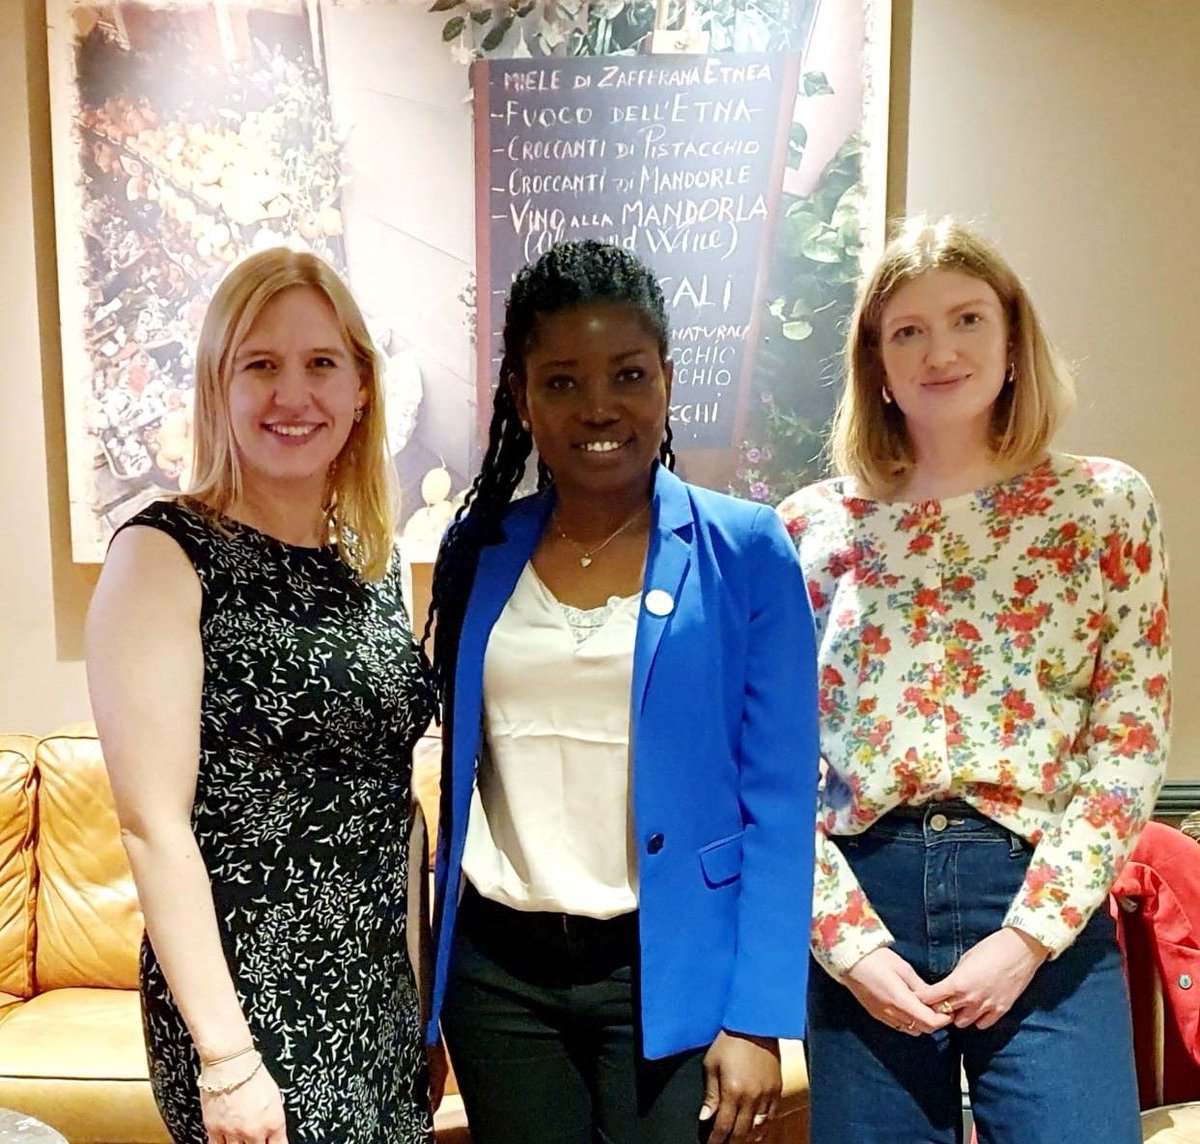 Our Director of Development met with Yvonne and Niamh from @kingcharlesfund who funded some of our parent and carer support courses in 2022/23. It was great to discuss #autismacceptance and how we can build a more #inclusivesociety for #autistic people. Thanks for you support💙